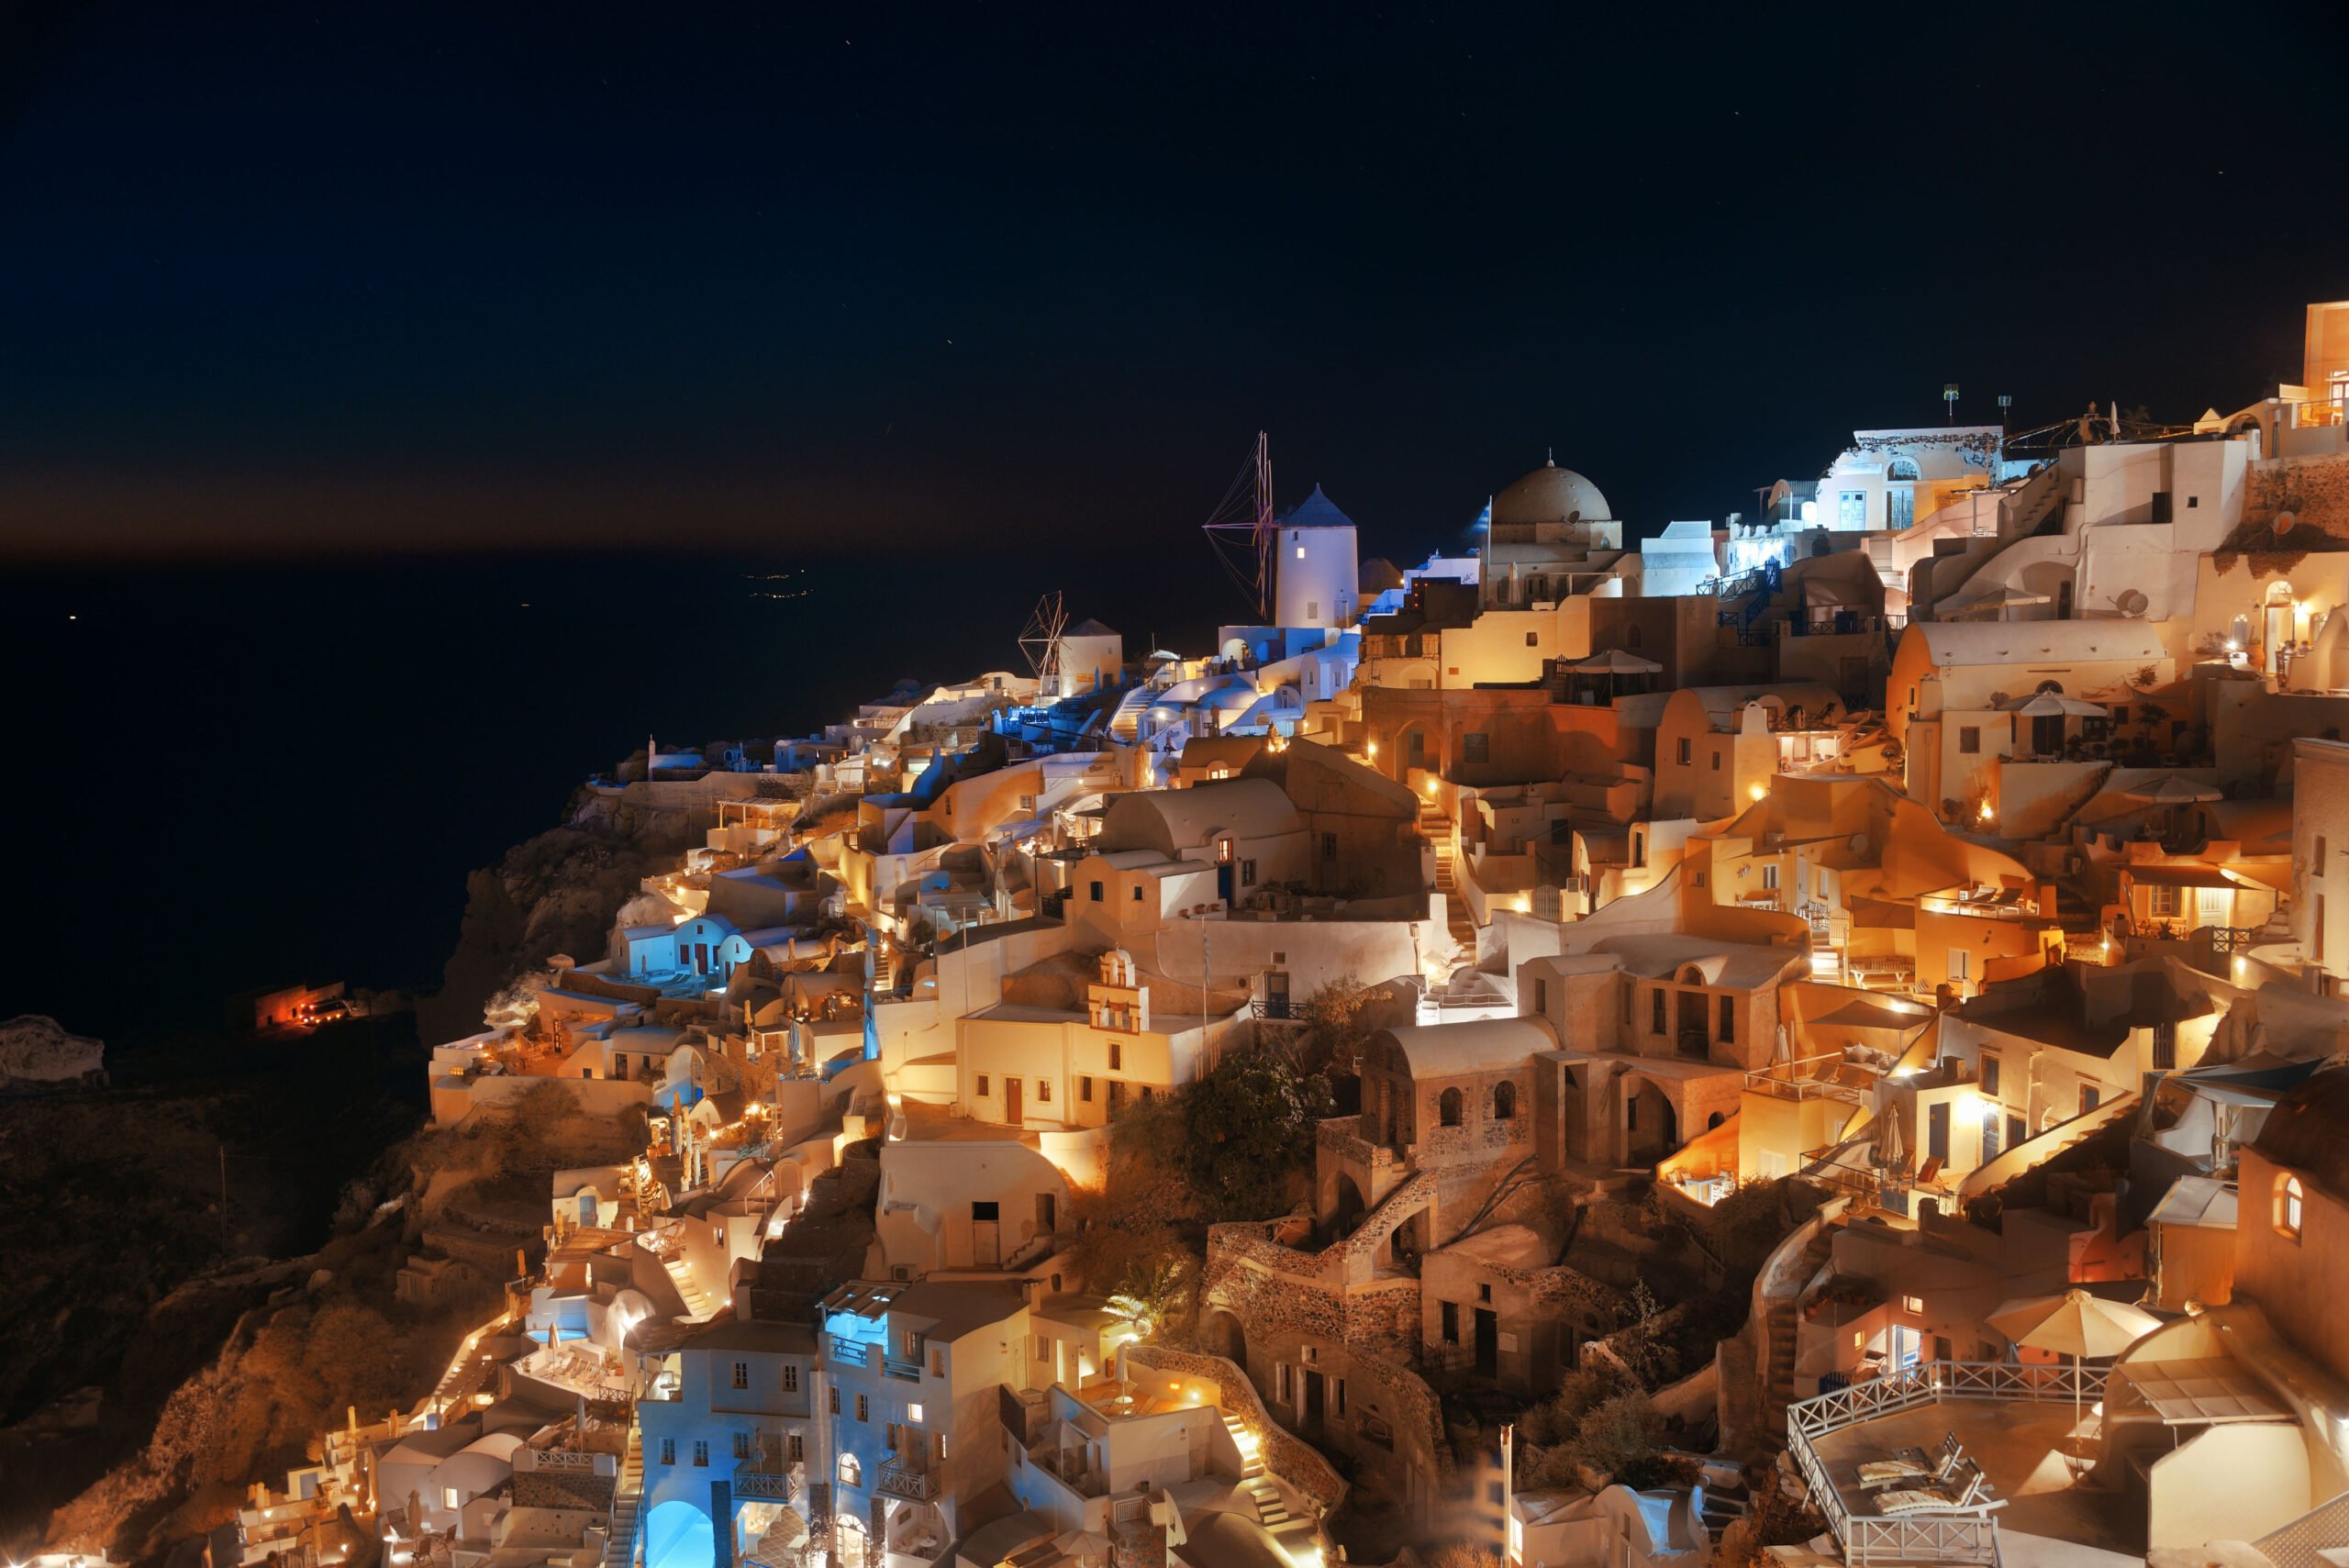 Discover Santorini With Us On The Join Us To The Night Hike, Wine Tasting & Dinner Experience In Santorini